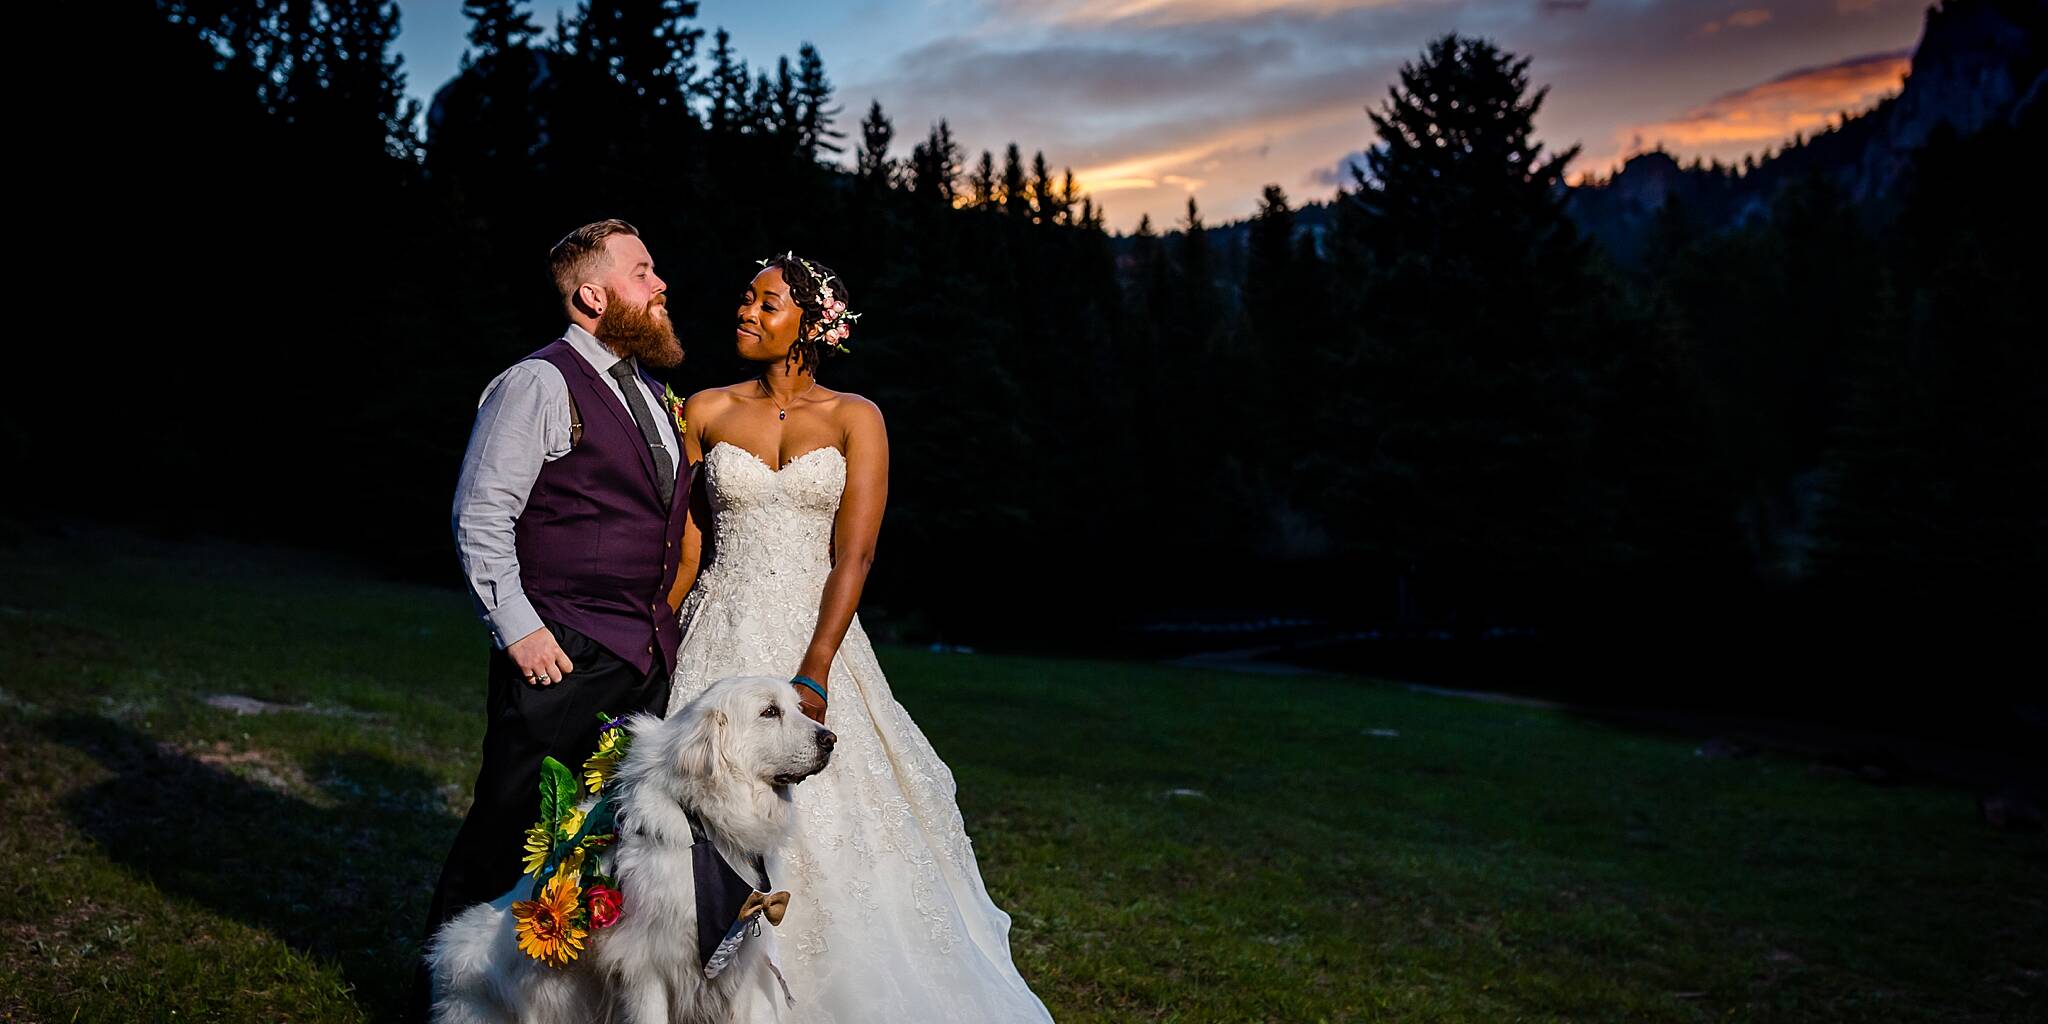 Bride, Groom and their Best Dog during a colorful Colorado Sunset. Latrice & Drew’s Mountain Wedding at Wedgewood Mountain View Ranch by Colorado Wedding Photographer, Jennifer Garza. Sunset Photos, Wedding Sunset Photos, Colorado Wedding Photographer, Colorado Wedding Photography, Colorado Mountain Wedding Photographer, Colorado Mountain Wedding, Mountain Wedding Photographer, Wedgewood Weddings, Wedgewood Weddings Mountain View Ranch, Dogs At Weddings, Wedding Dogs, Dog Wedding, Colorado Bride